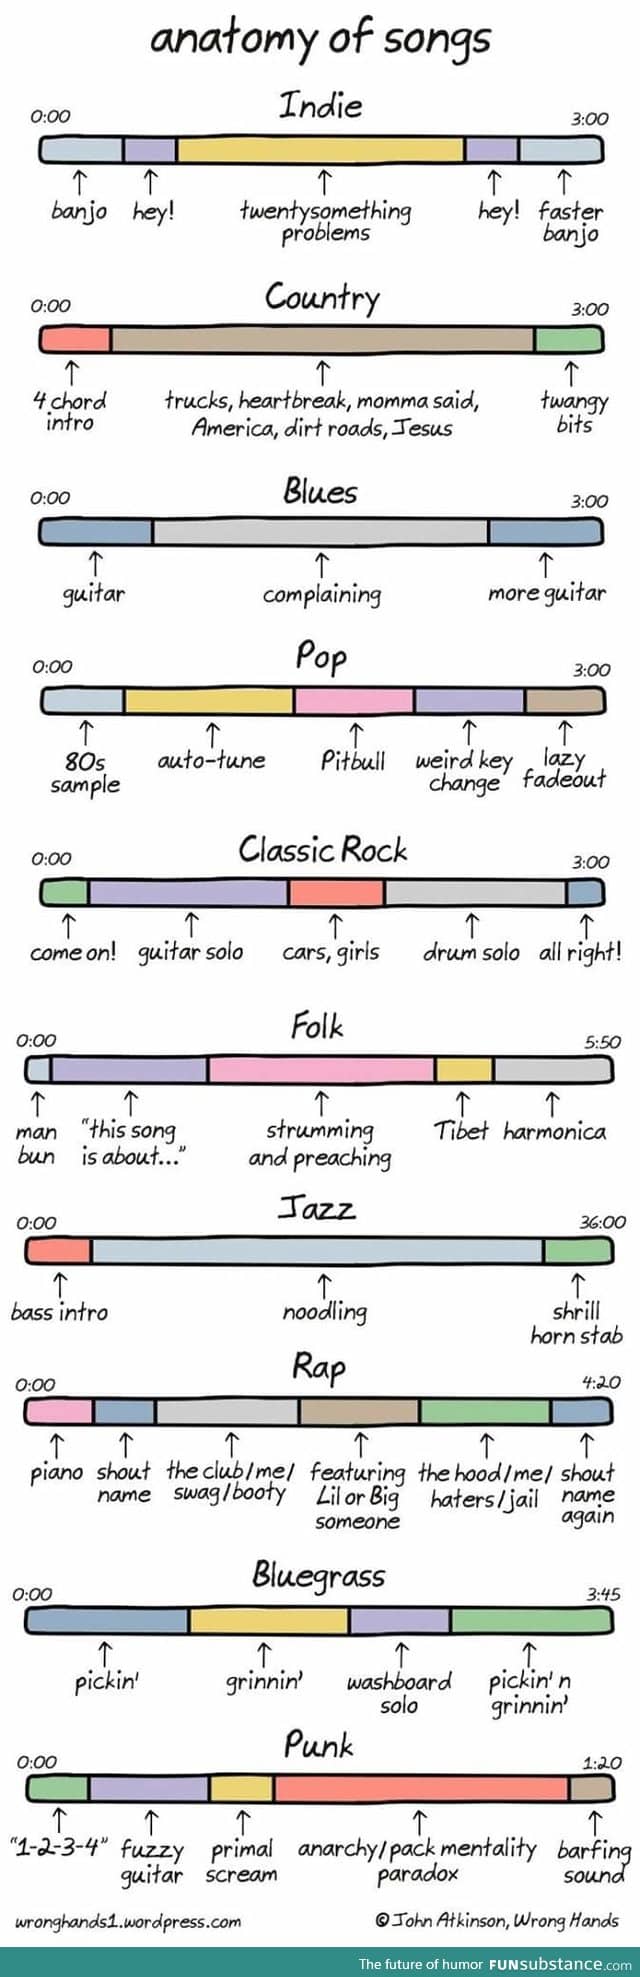 The anatomy of songs